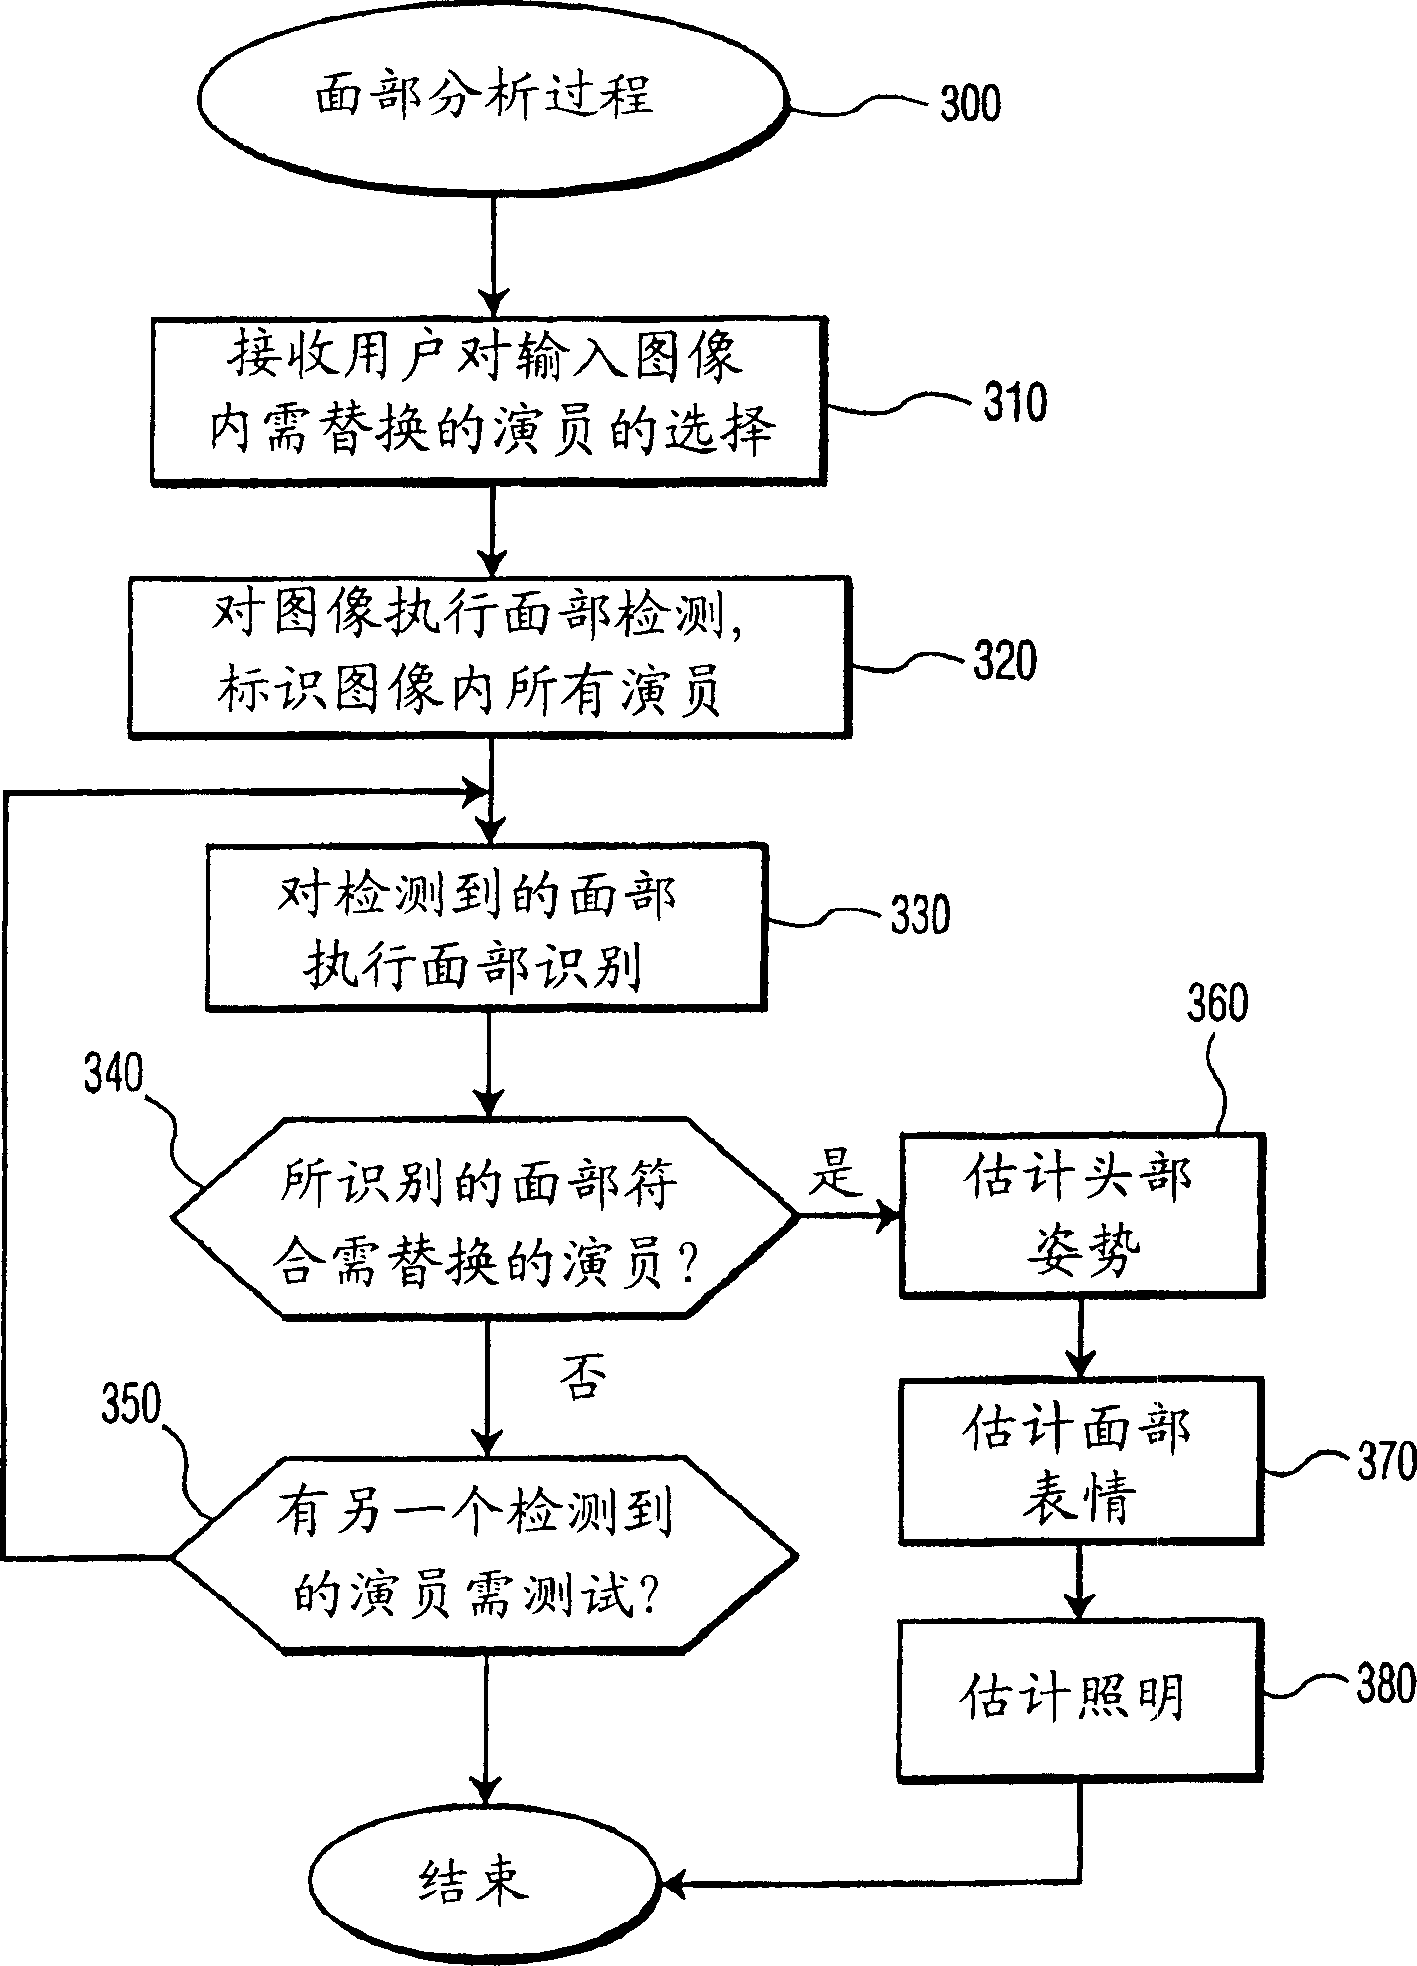 Method and apparatus for interleaving a user image in an original image